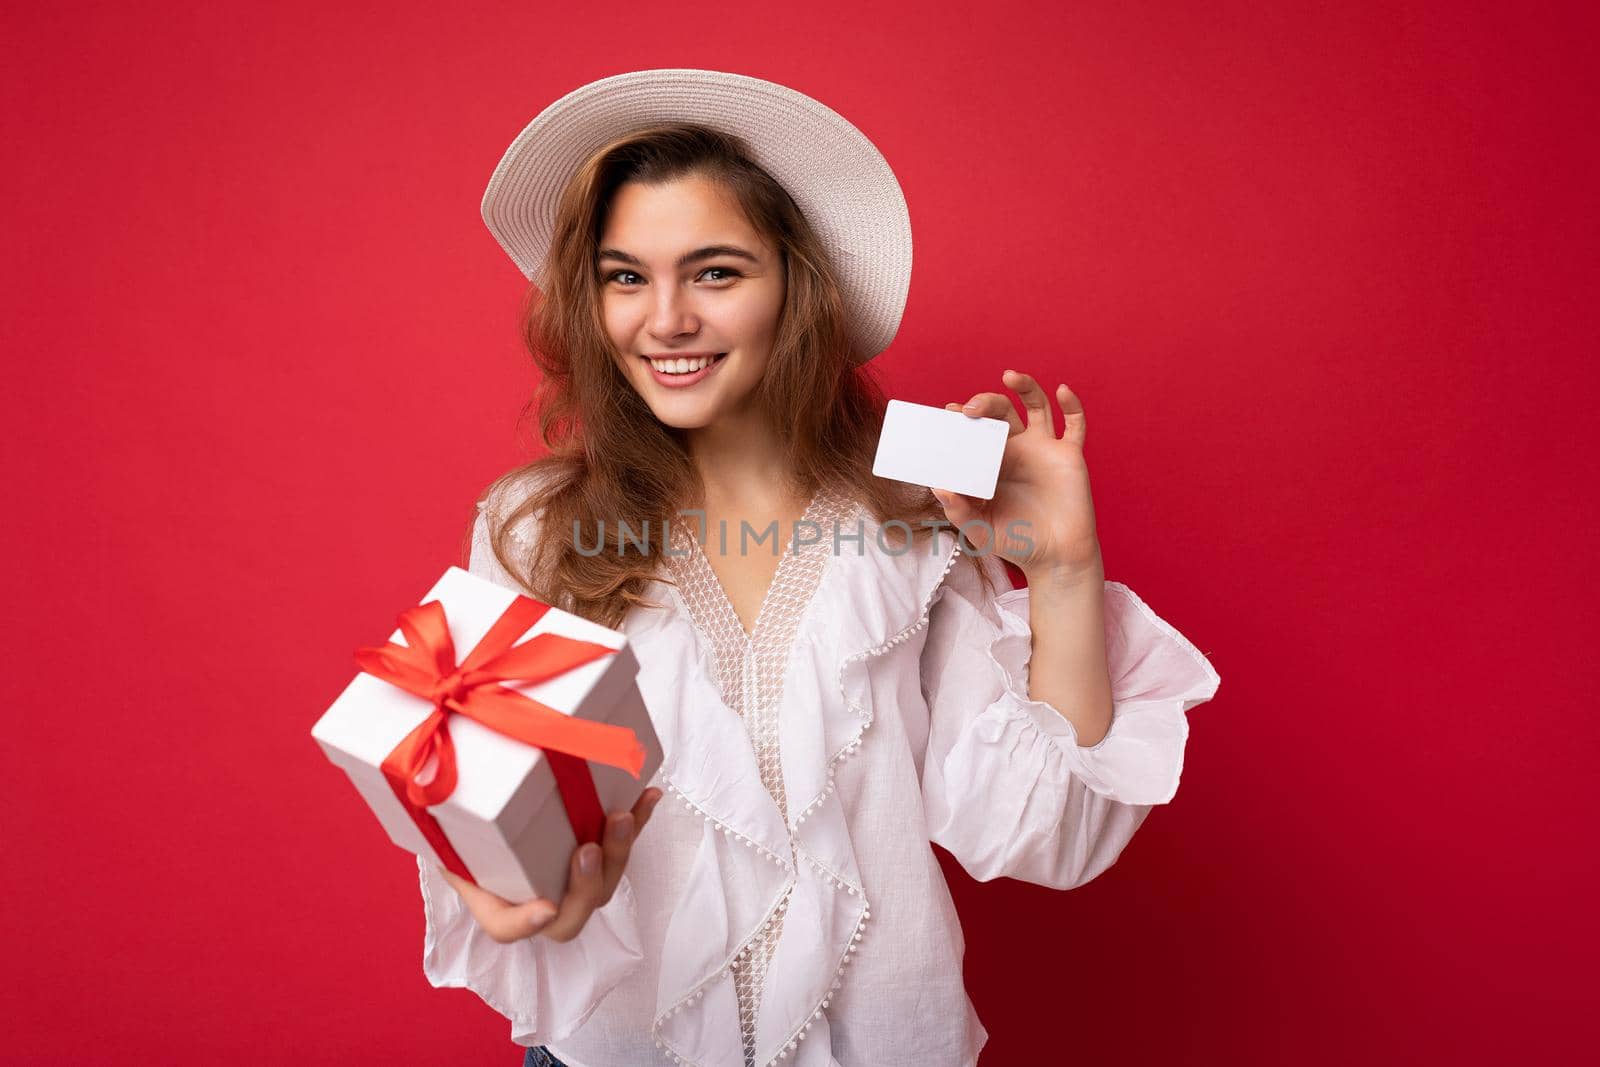 Young beautiful european stylish brunette woman wearing white blouse and fashionable hat isolated over red background with positive sincere emotions. Simple and natural looking at the camera. Holding gift box and credit card. Free space. Mock up.